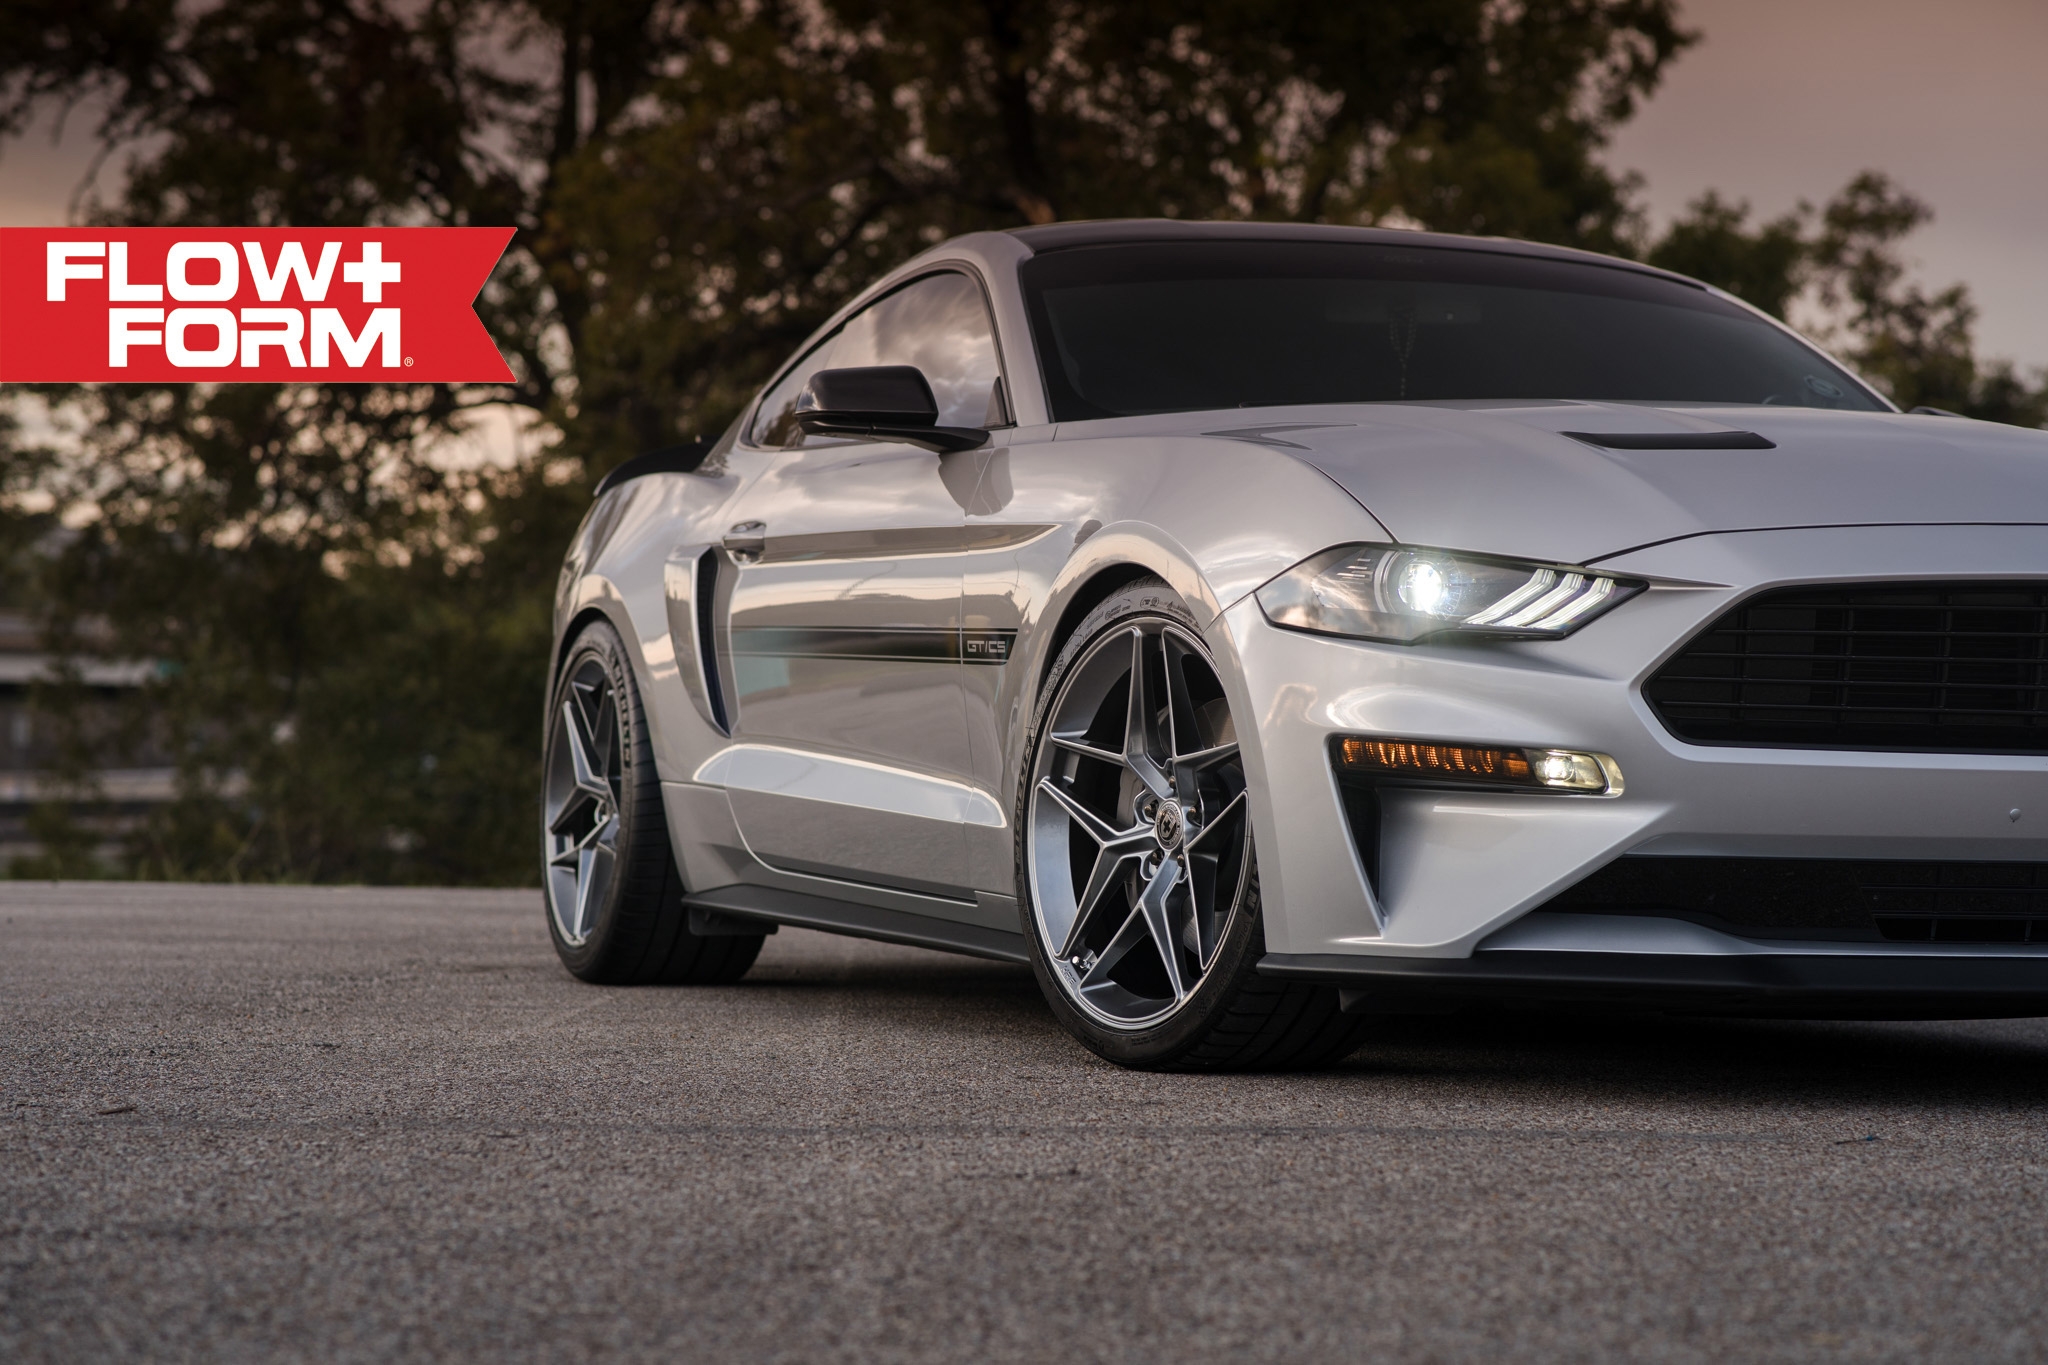 S650 Mustang Authorized HRE Wheels Dealer: Flow Form and Forged Series Wheels For Mustang S650 2